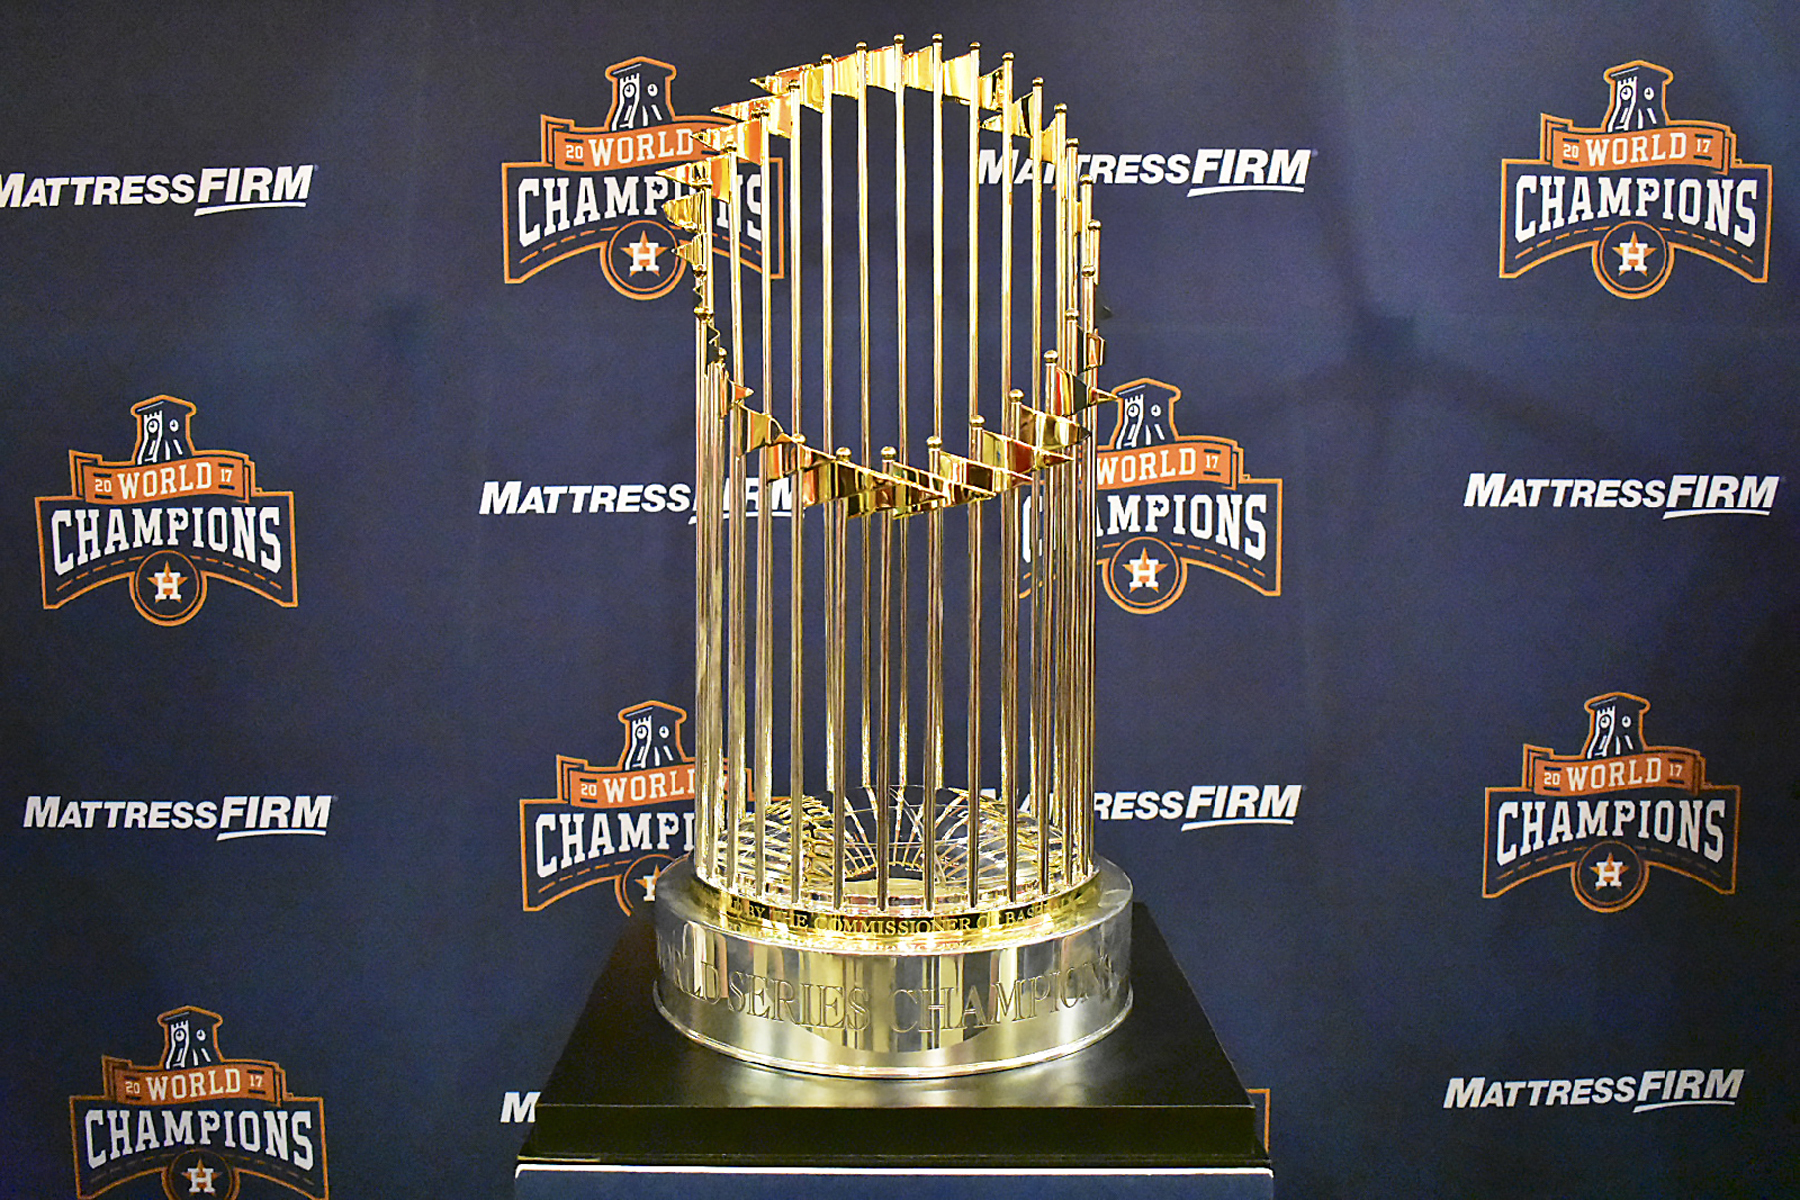 The the Houston Astros 2017 World Series Trophy